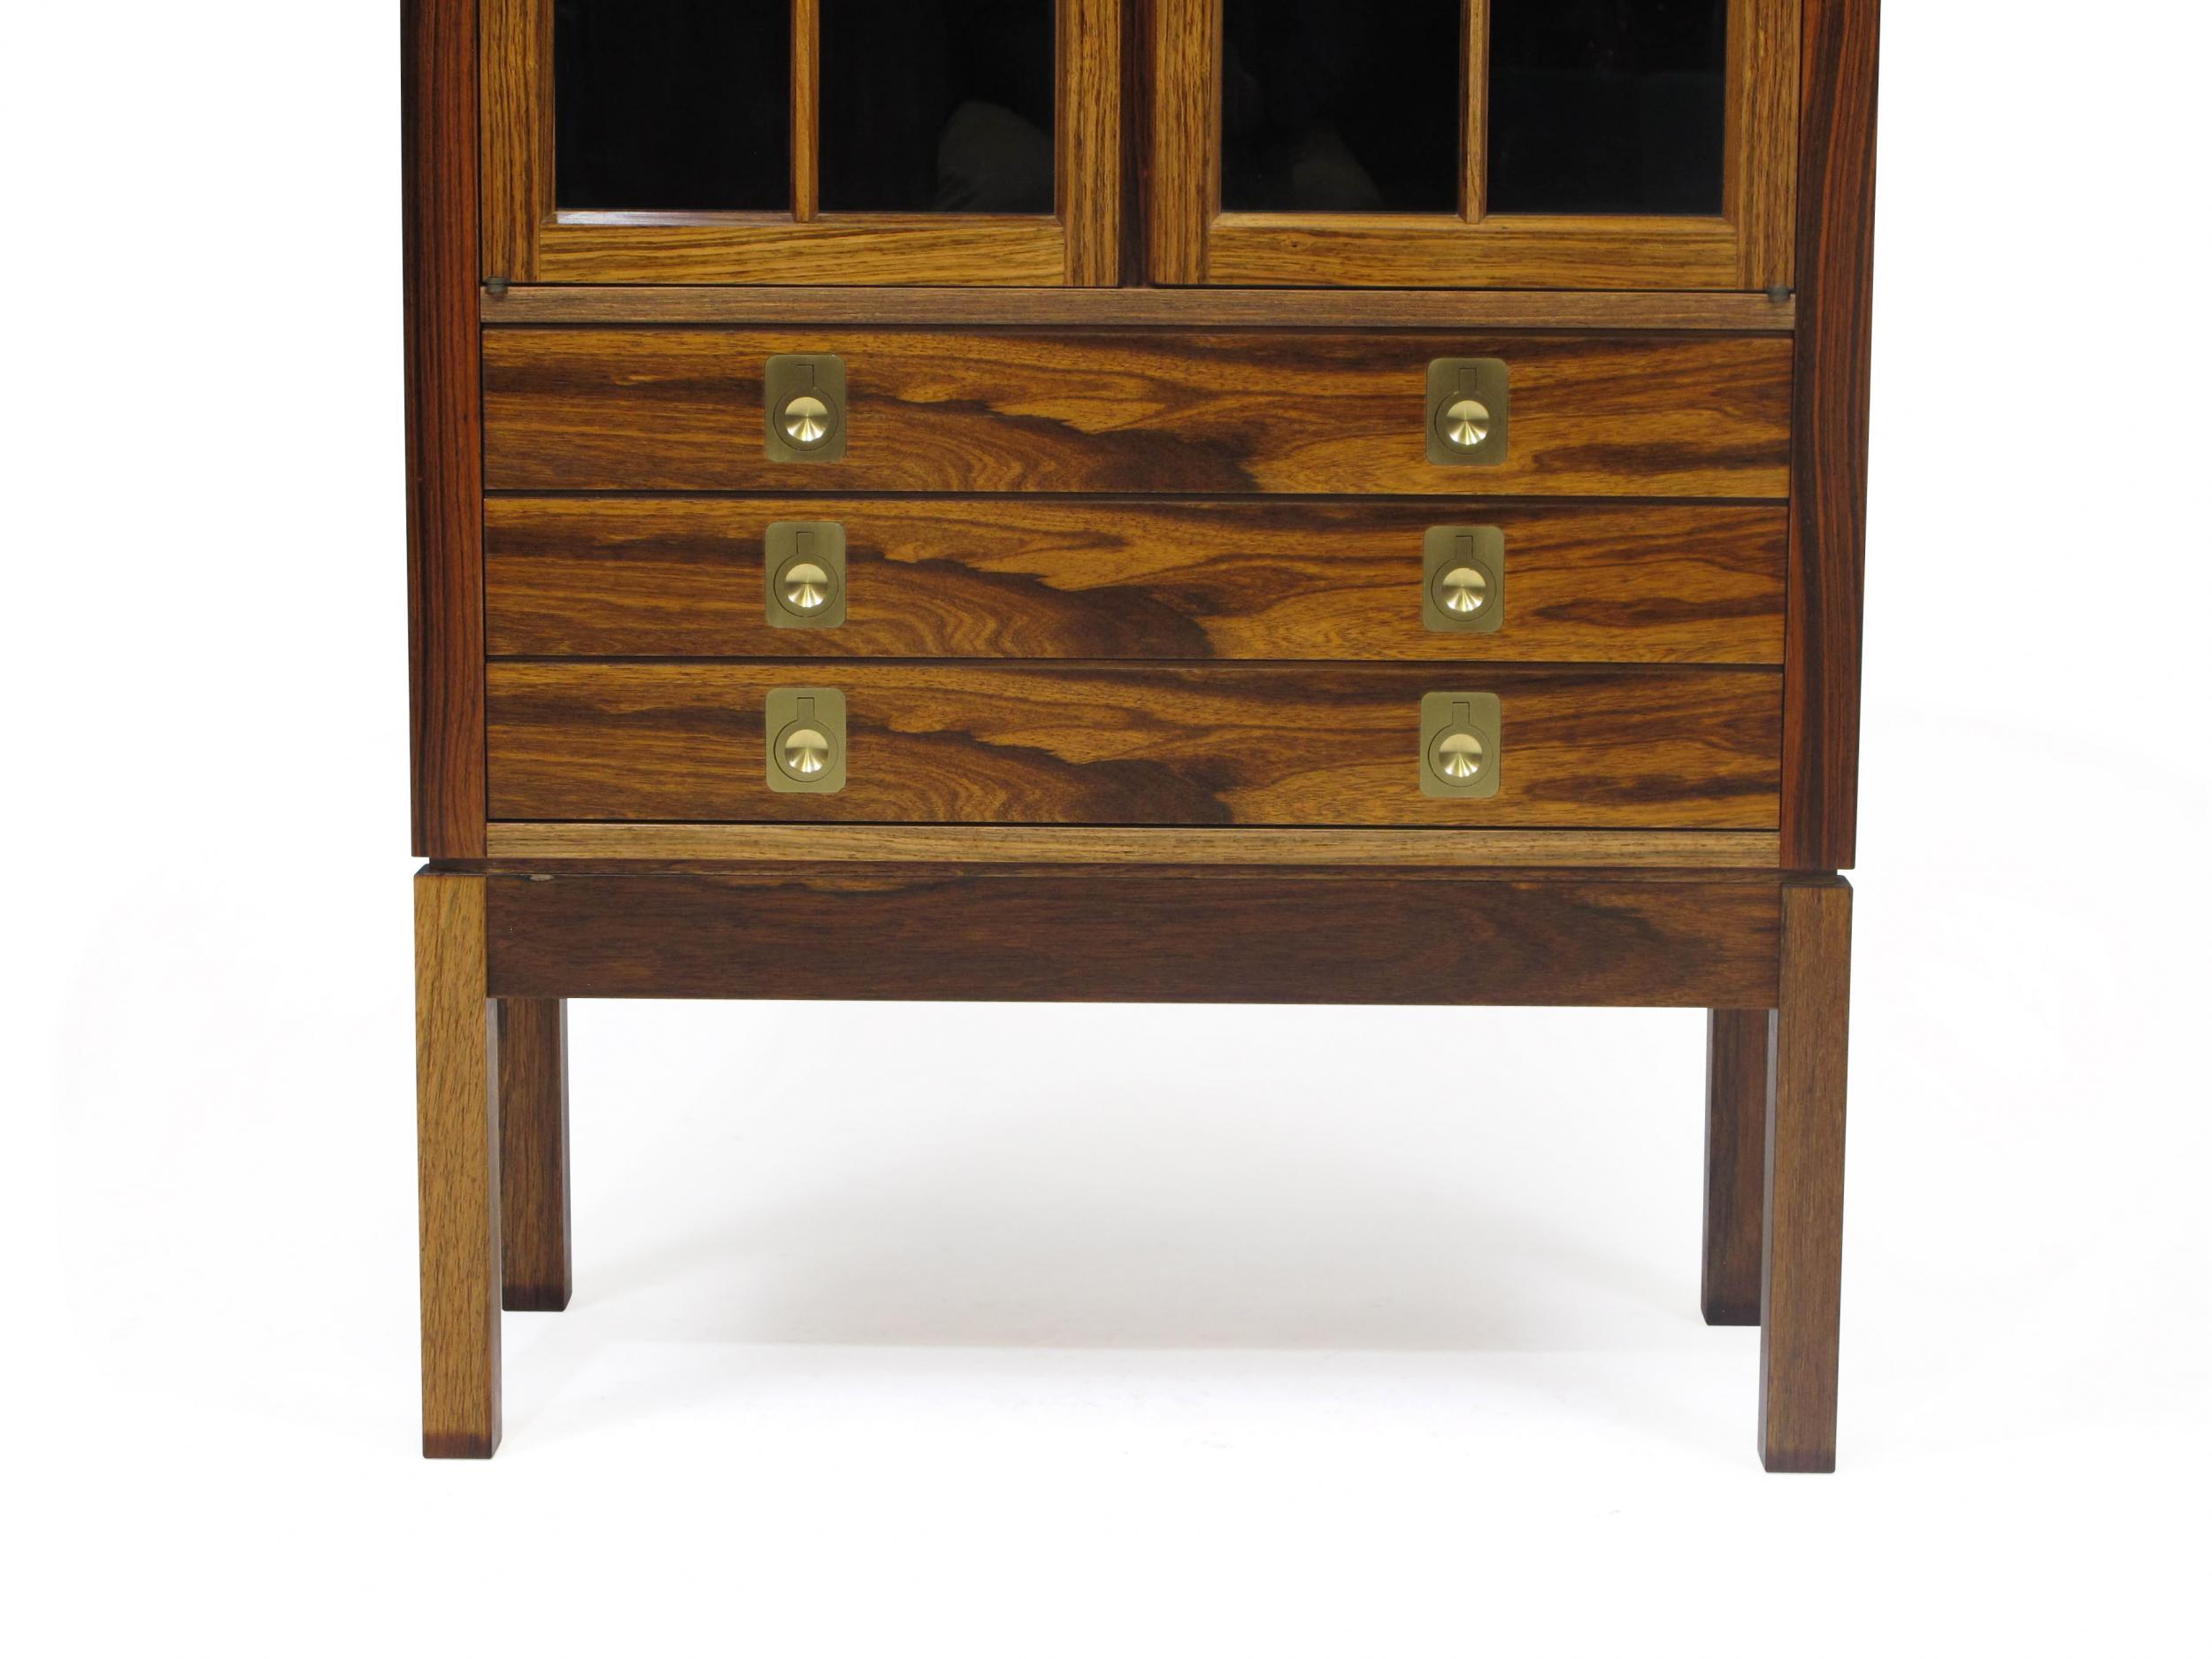 Rosewood china cabinet designed by Torbjorn Afdal for Mellemstrand Moblefabrik, circa 1960 Norway. Features a three-drawer cabinet with brass pulls and a locking glass hutch. Rosewood pattern match down the front of drawers with brass handles. Glass